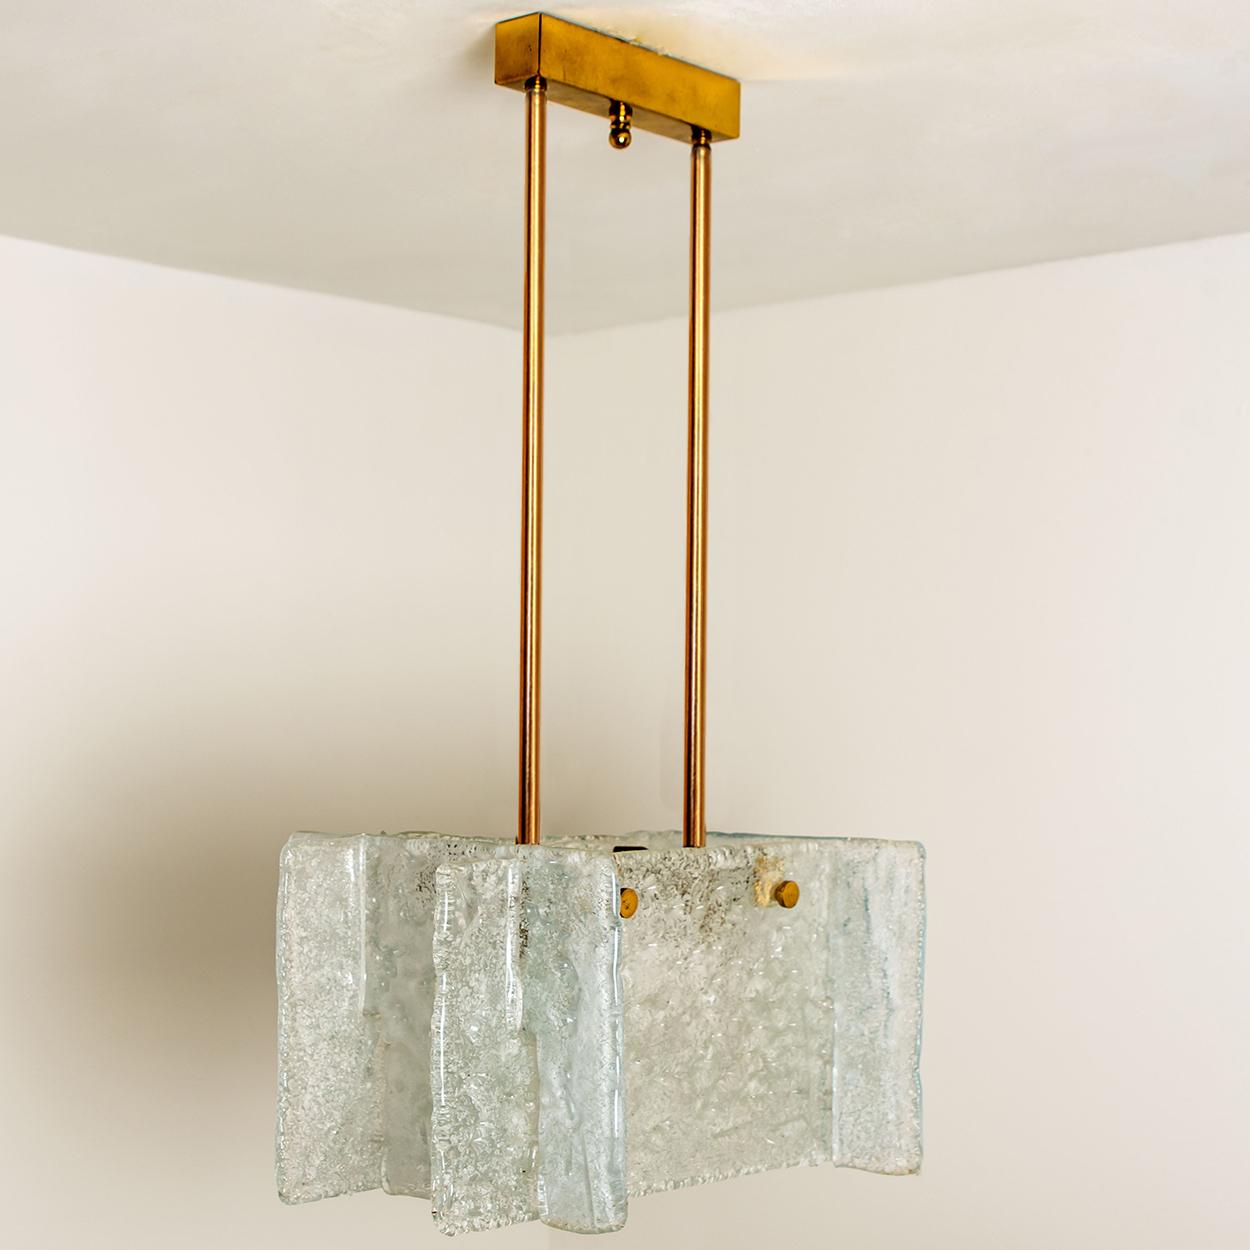 An ice glass pendant light designed by J.T Kalmar, manufactured by Kalmar Franken, Austria in the 1960s.
High-end and handmade design from the 20th century. The pendant/chandelier has four textured glass shades. Together they form a rectangular